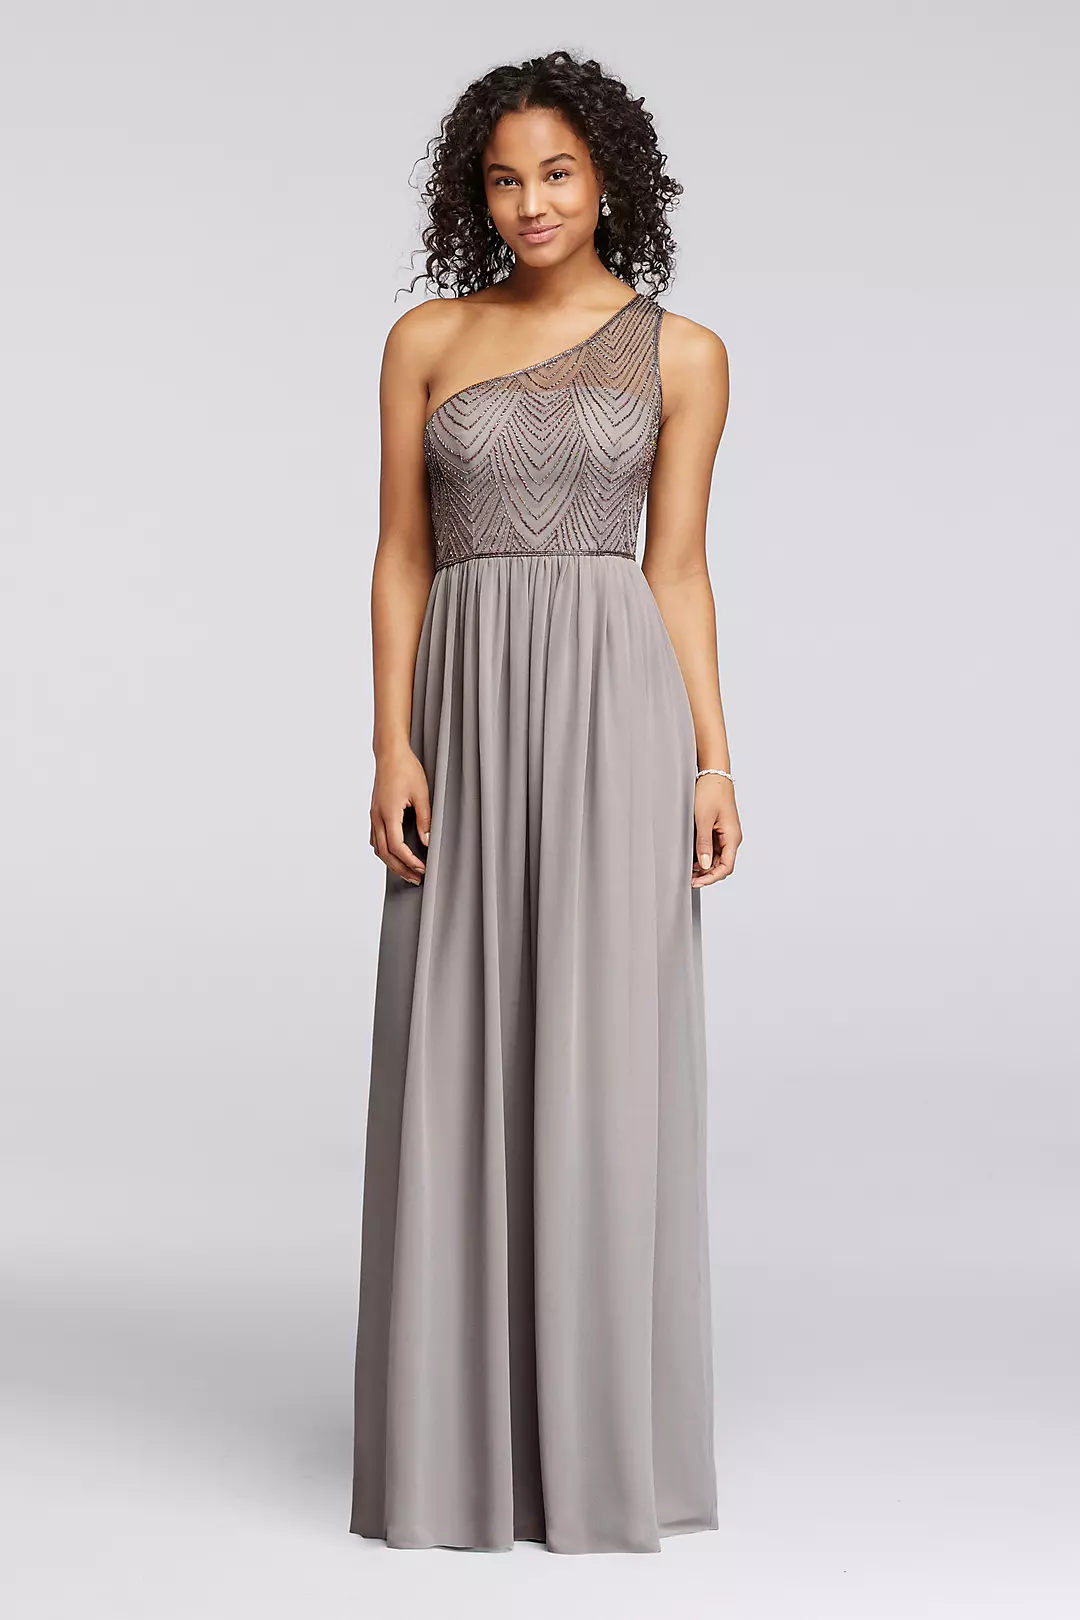 One-Shoulder Long Dress with Beaded Bodice  Image